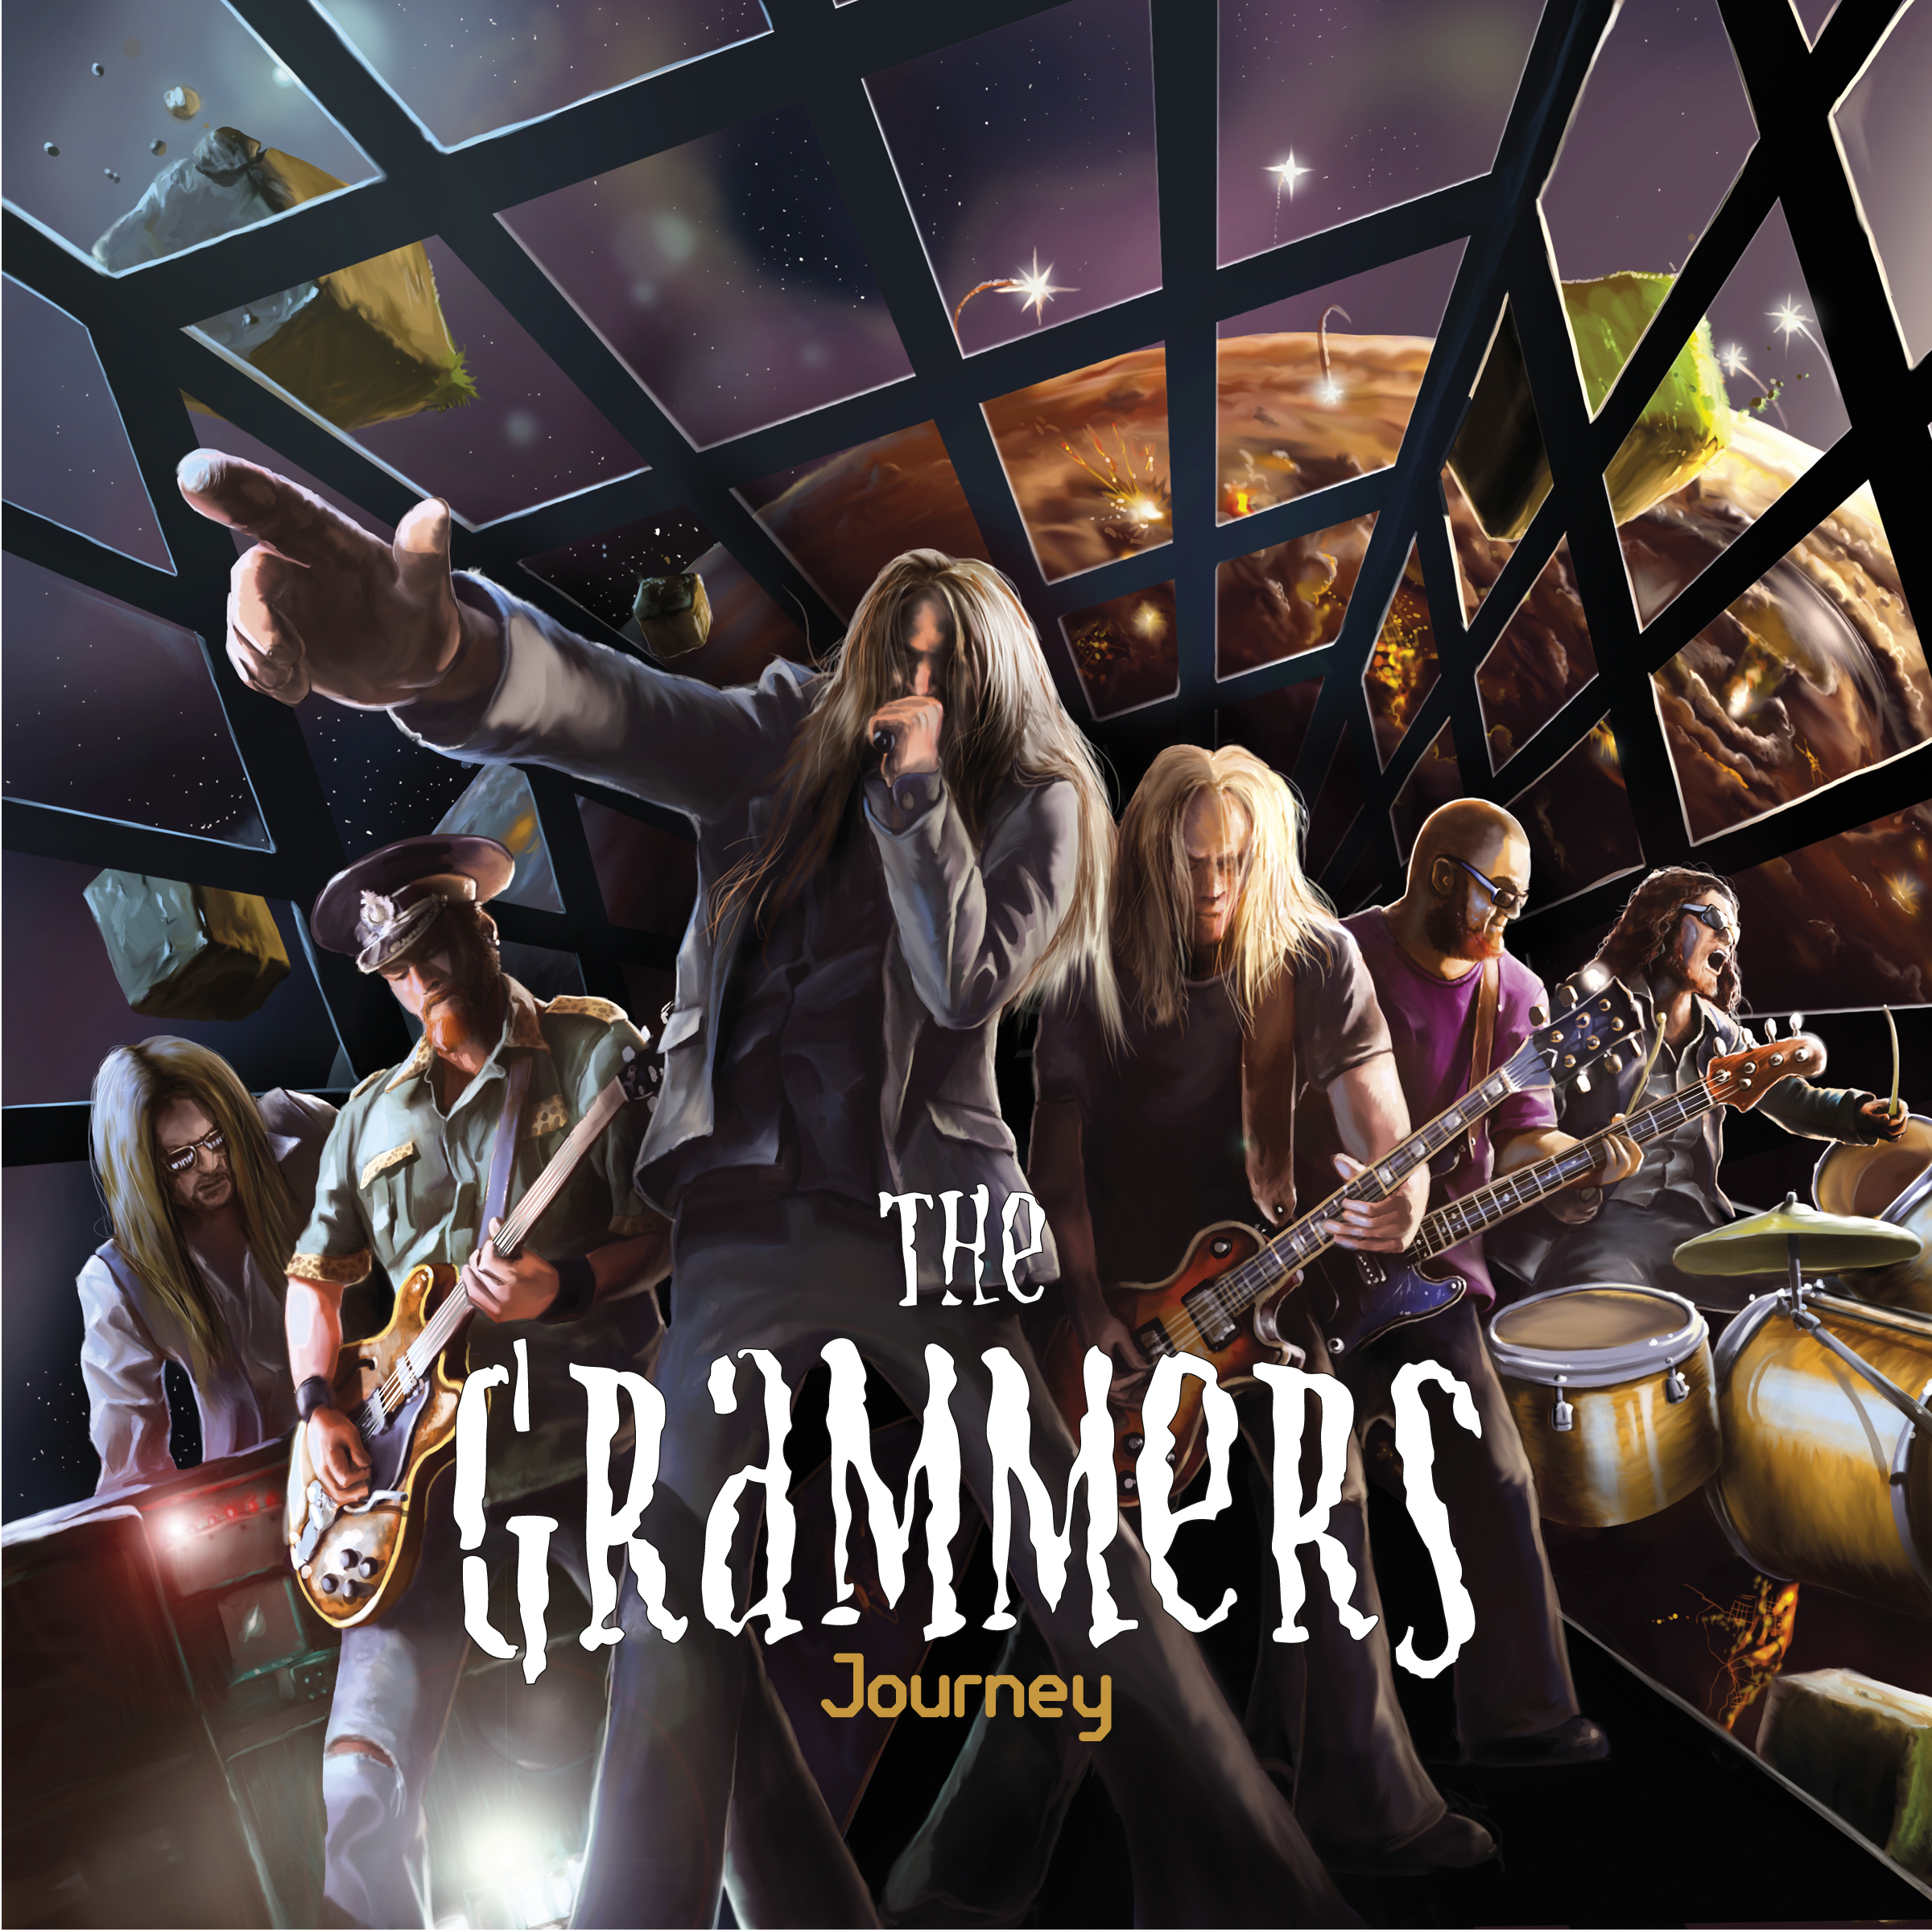 The Grammers - Journey - CD